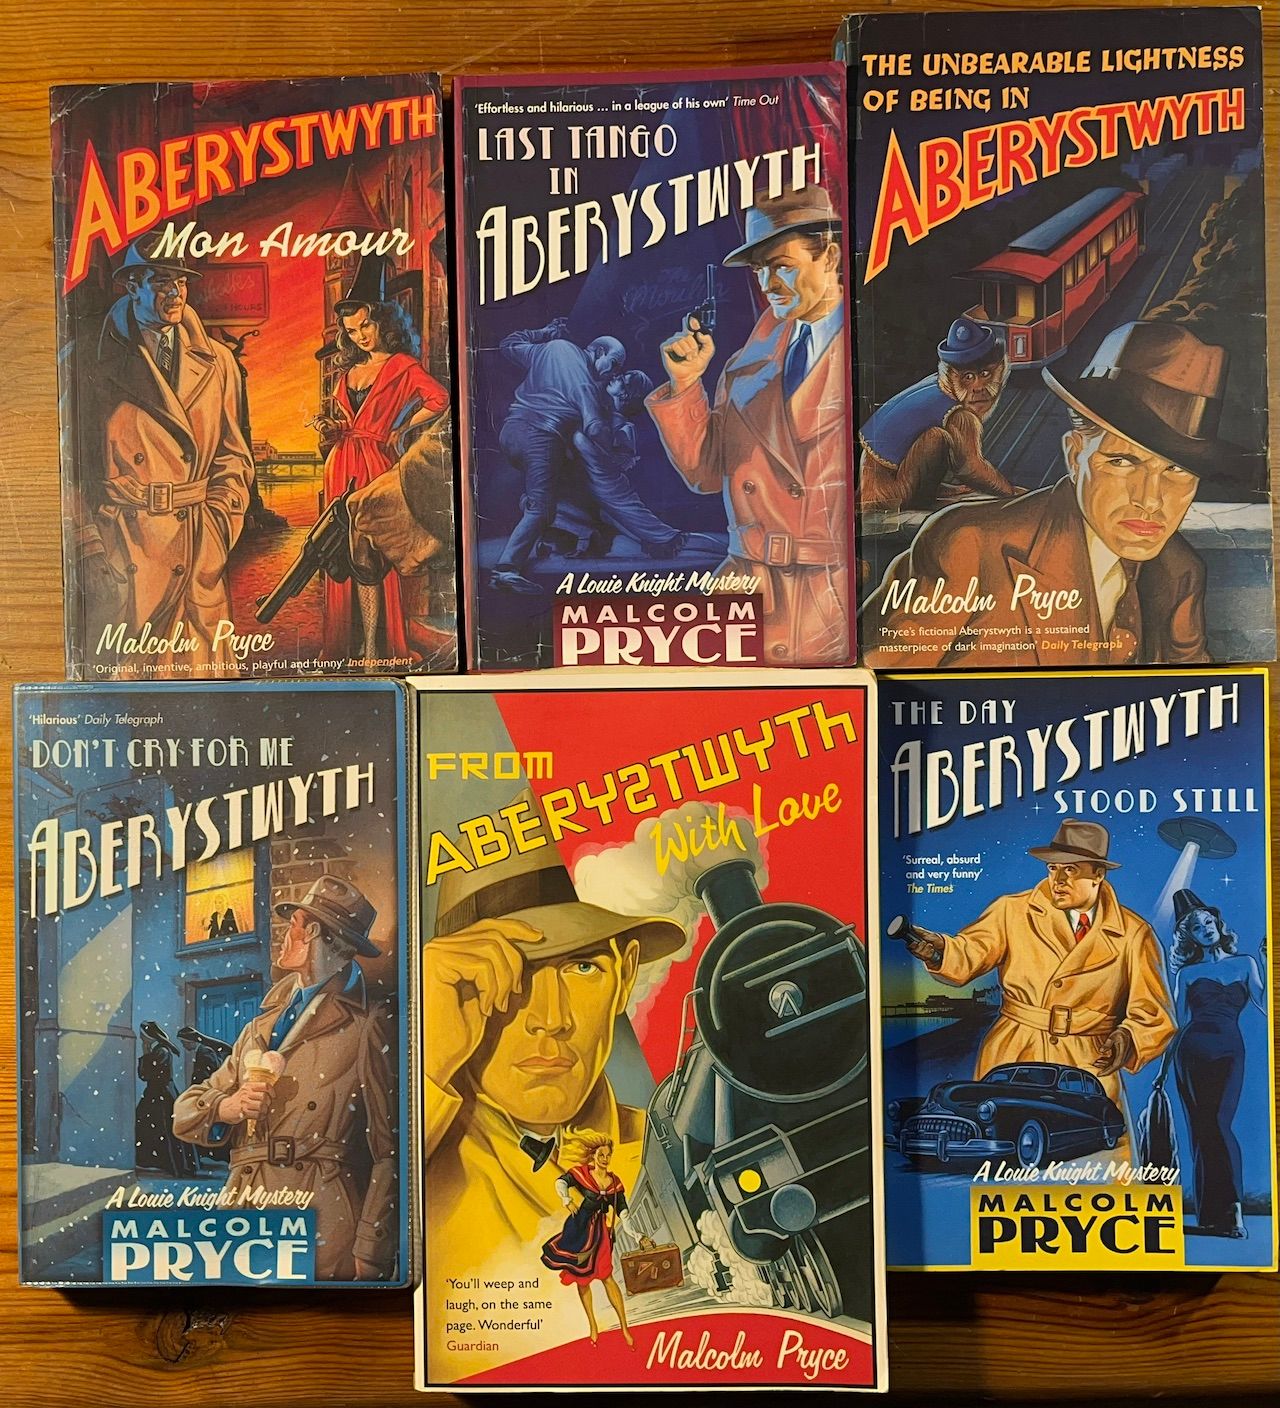 Covers of the six Aberystwyth Noir novels by Malcolm Price. Aberystwyth, Mon Amour; Last Tango in Aberystwyth; The Unbearable Lightness of Being in Aberystwyth; Don't Cry for Me, Aberystwyth; From Aberystwyth with Love; The Day Aberystwyth Stood Still